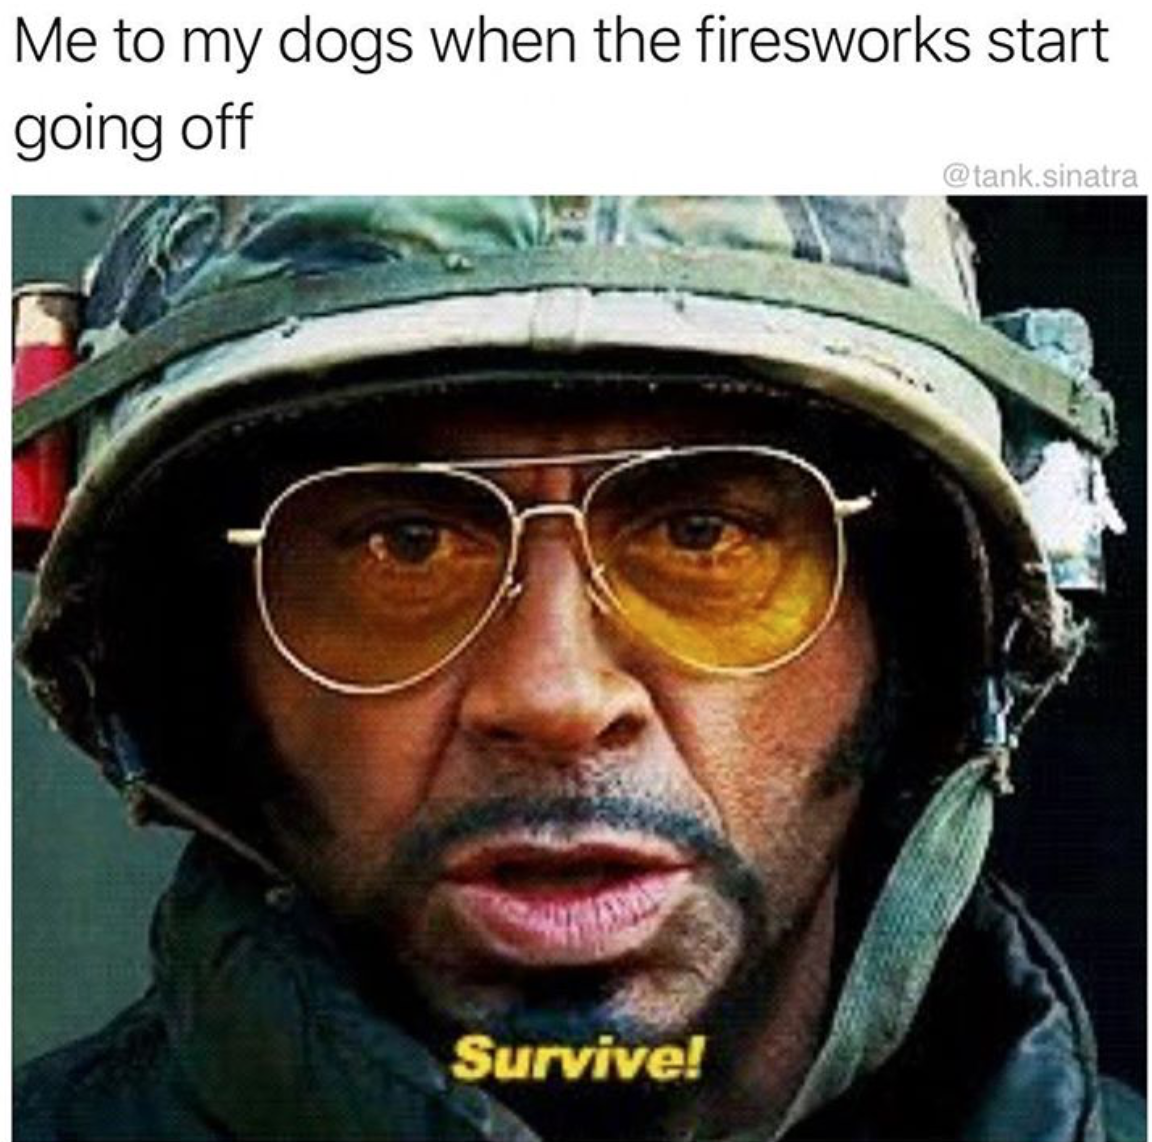 These 4th of July memes are real firecrackers